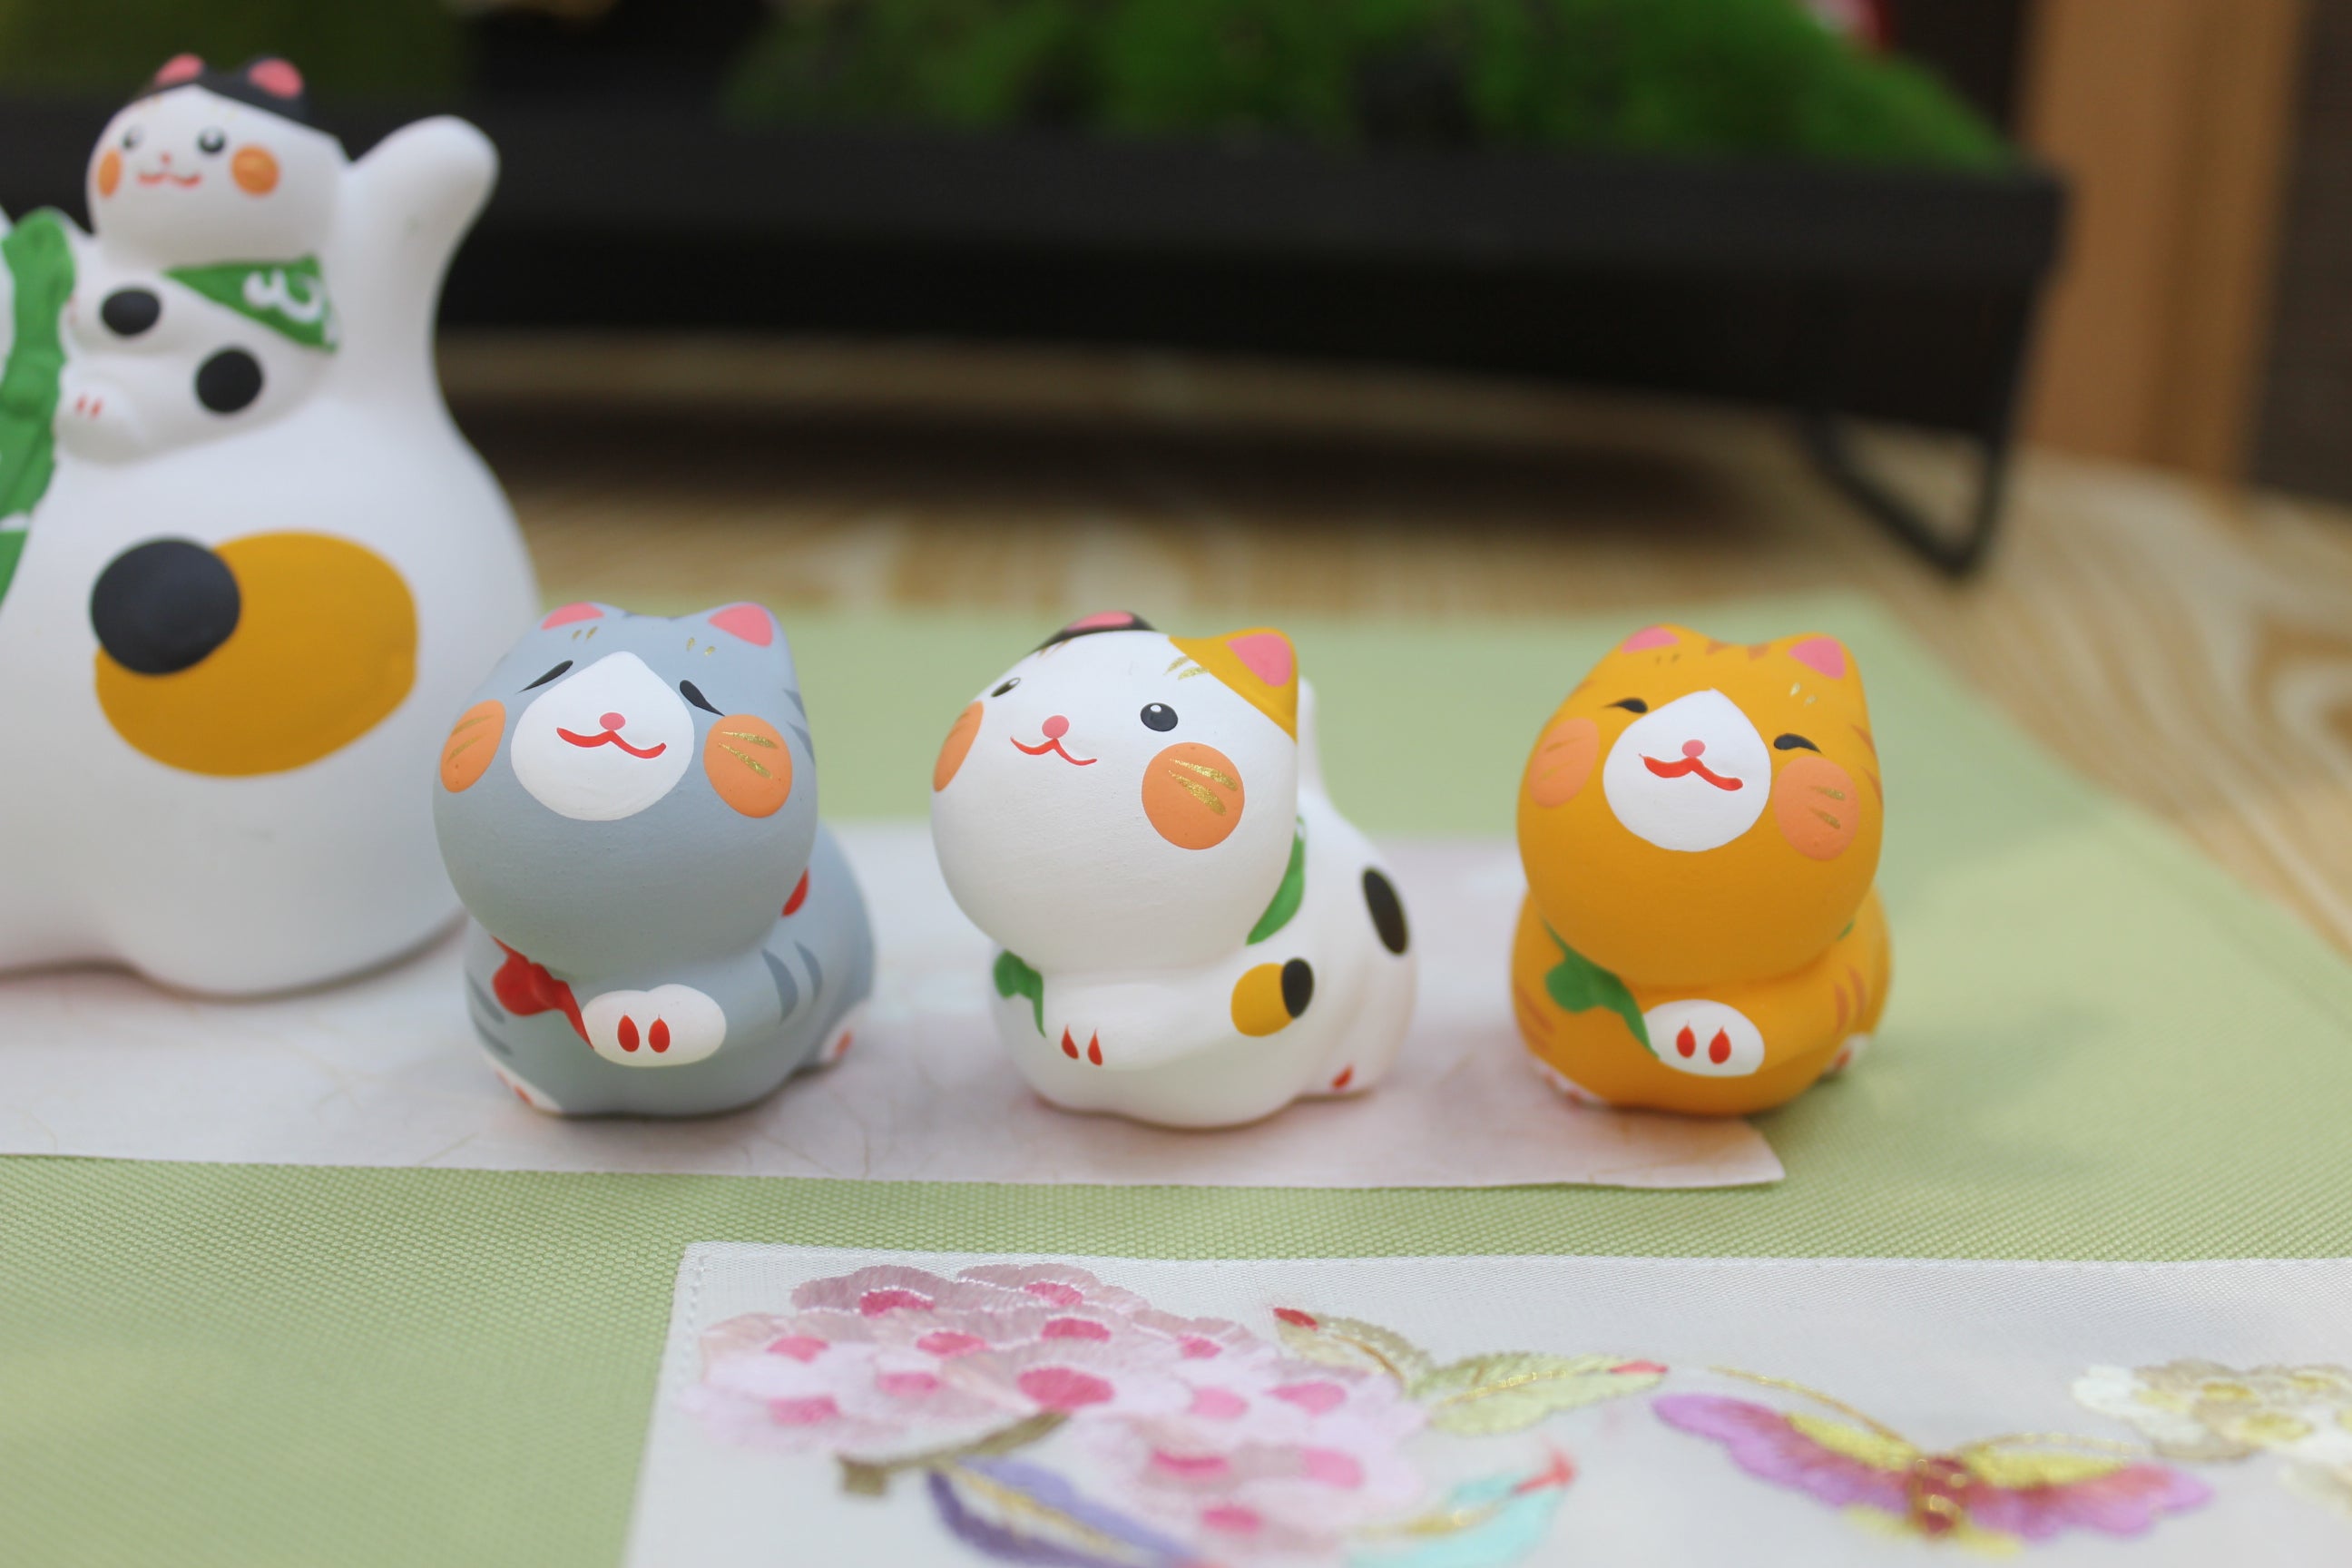 LHZ-372207 Long Hu Zuo Family of Fortune Cat (M)